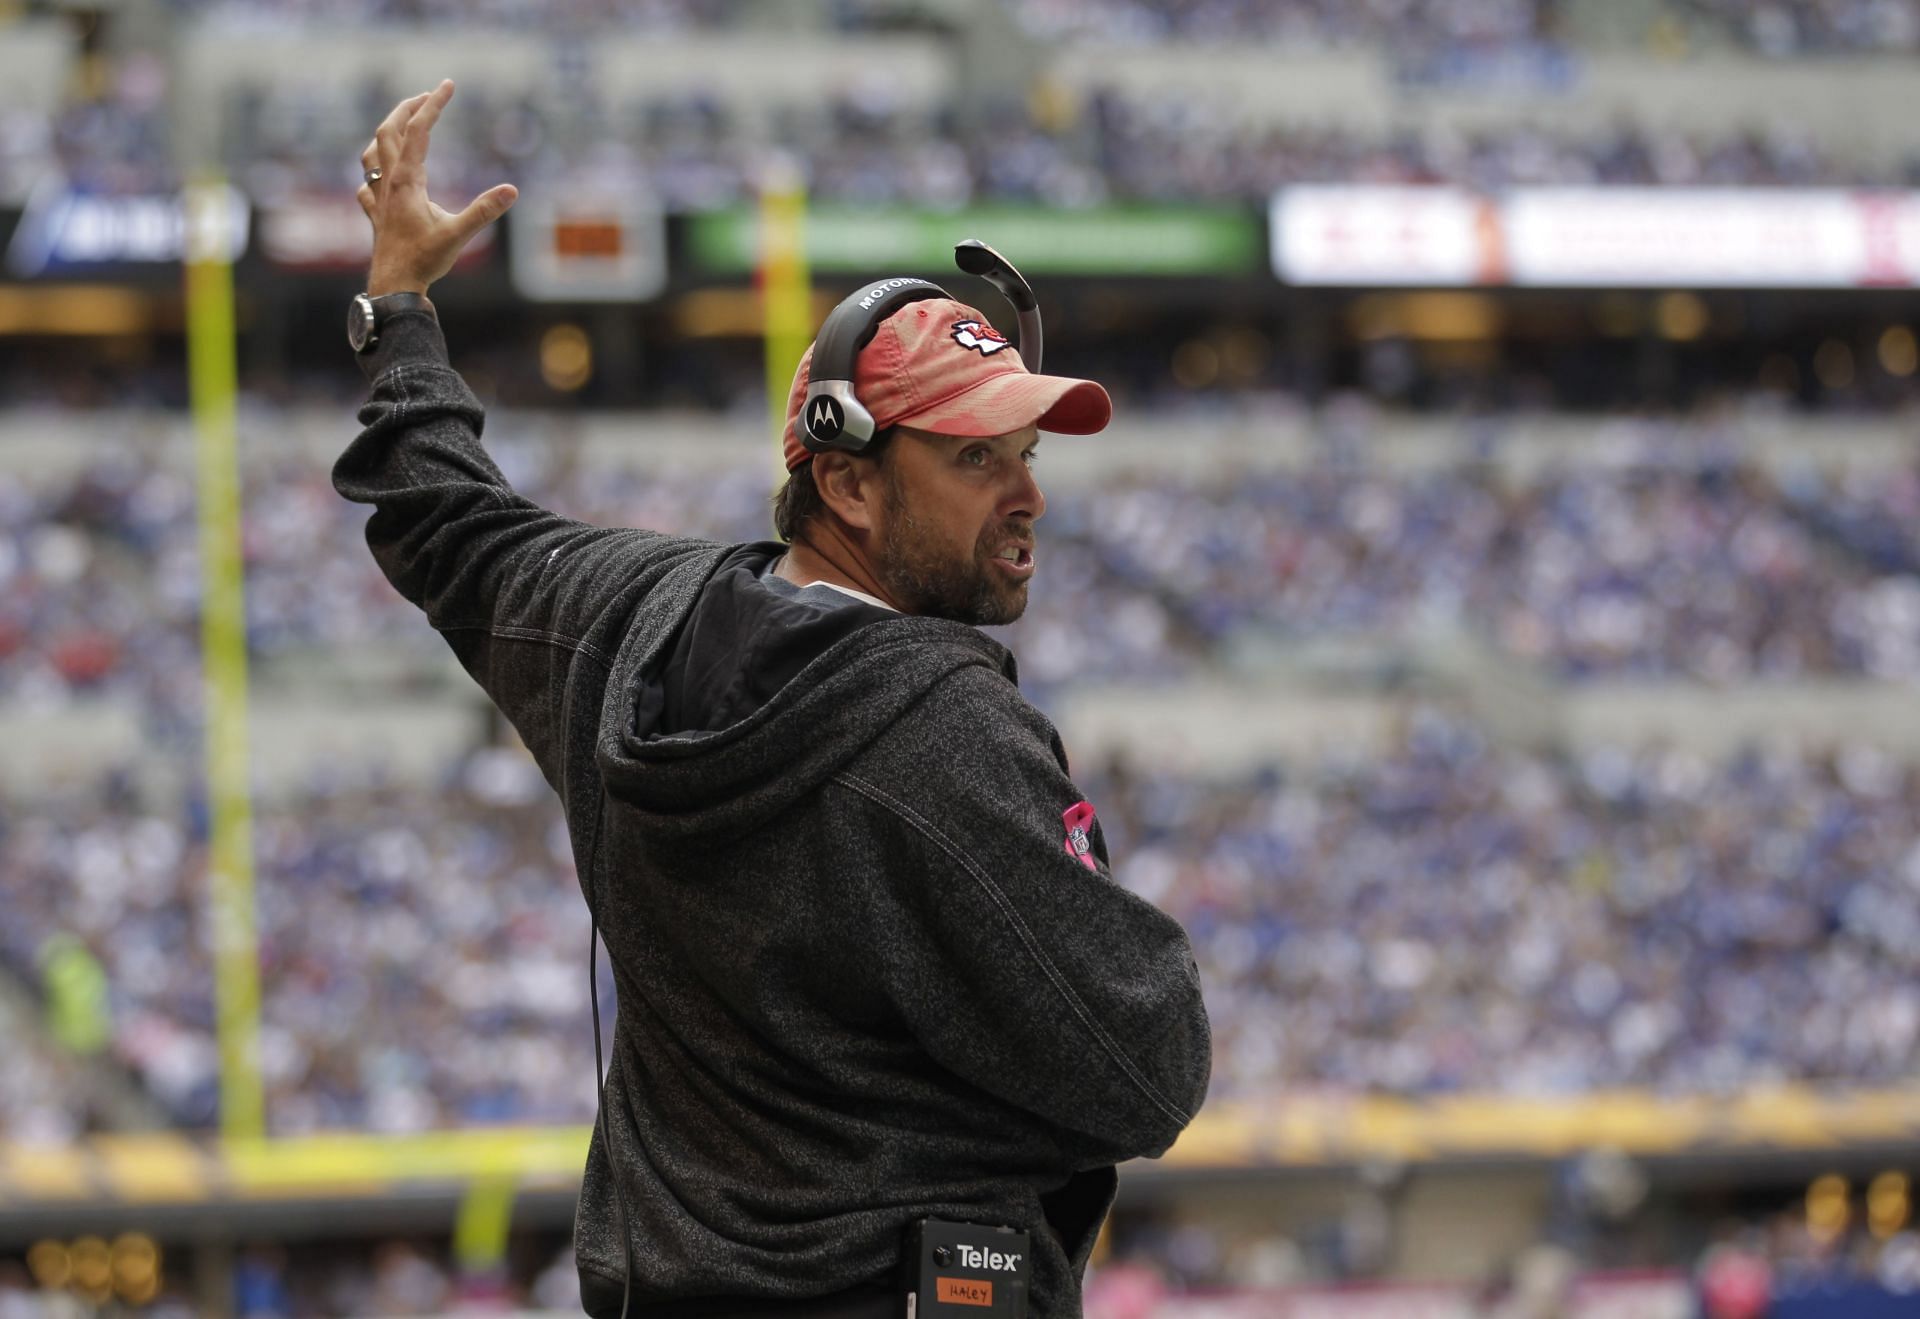 Todd Haley is back to coaching as a pro in the USFL after serving as a high school offensive coordinator.